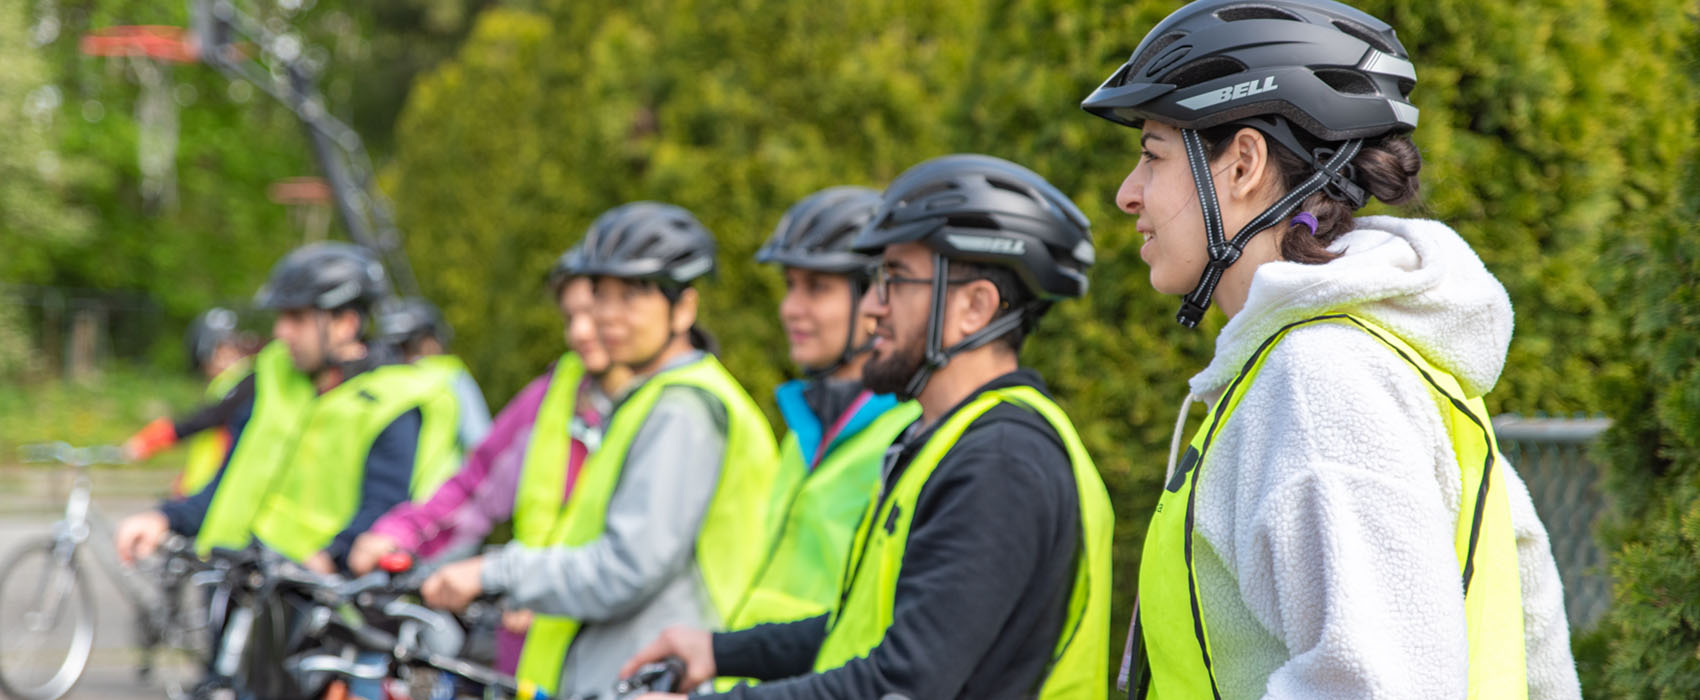 Cyclists in a line wearing helmets and yellow high-vis vests